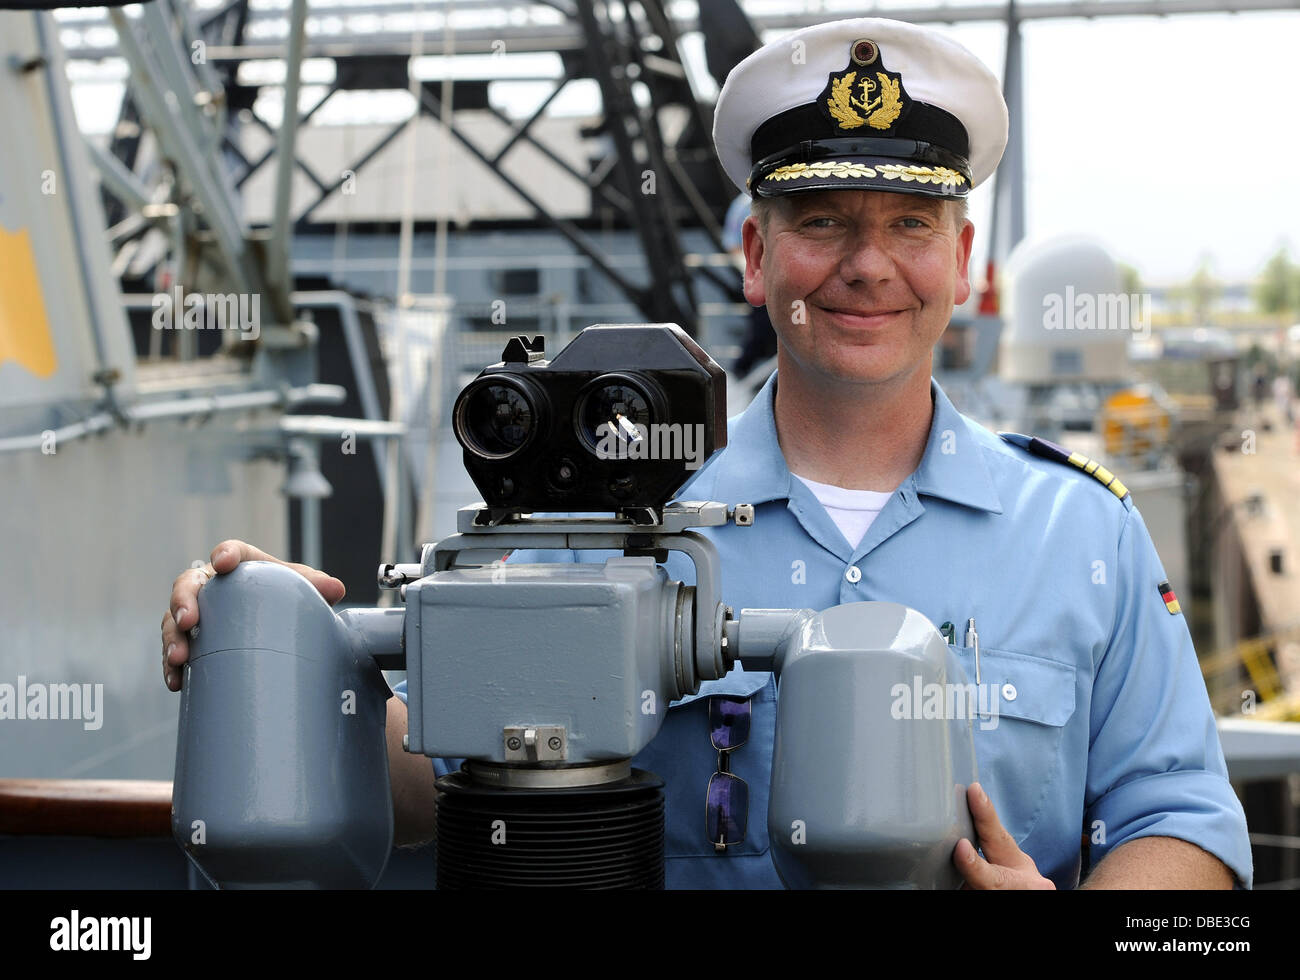 Bremen, Germany. 29th July, 2013. Commander of Frigate 'Bremen', Frigate captain Ingolf Schlobinsky, is pictured on his ship in the Grain Habour in Bremen, Germany, 29 July 2013. The ship of the German navy visited its partner city for the last time. The ship will be de-commissioned after the visit after 31 years of service. Photo: INGO WAGNER/dpa/Alamy Live News Stock Photo